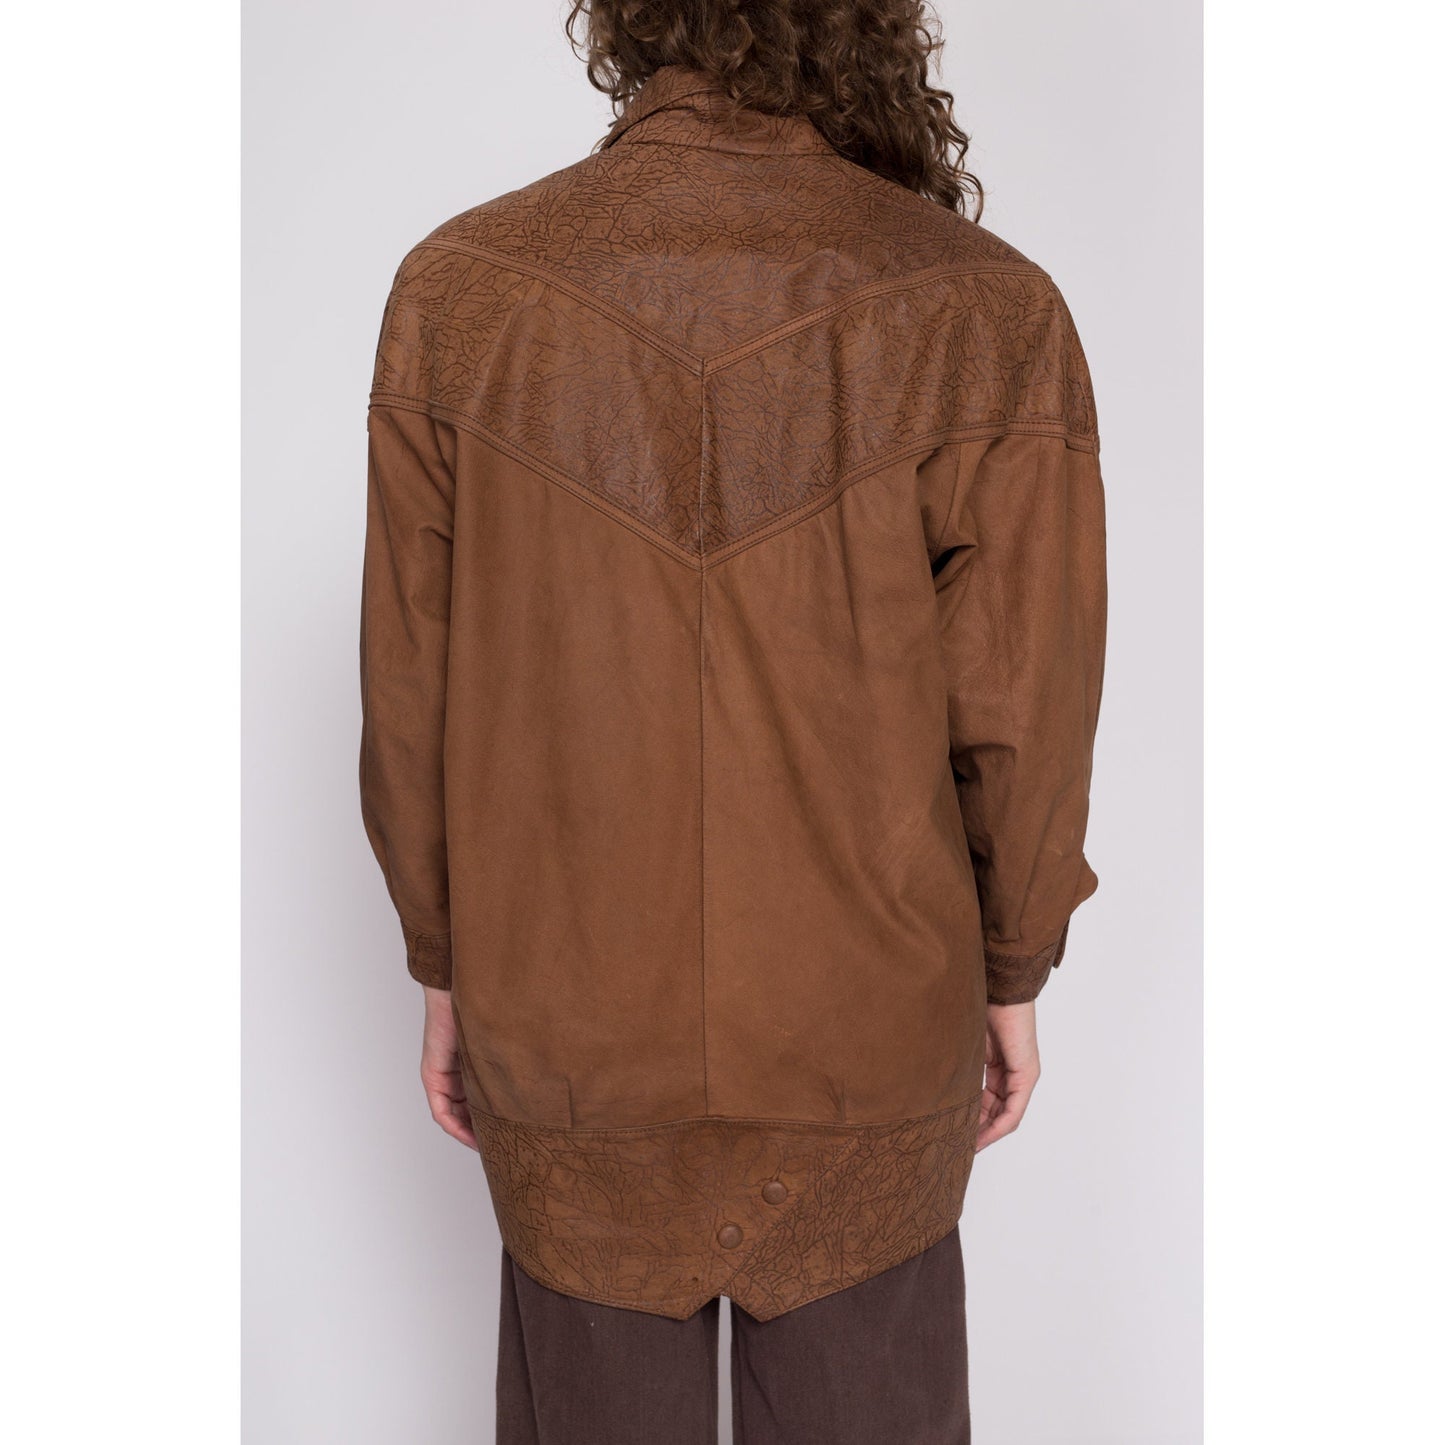 M| 80s G-III Brown Leather Embossed Jacket - Medium | Vintage Oversize Long Double Breasted Snap Up New Wave Coat